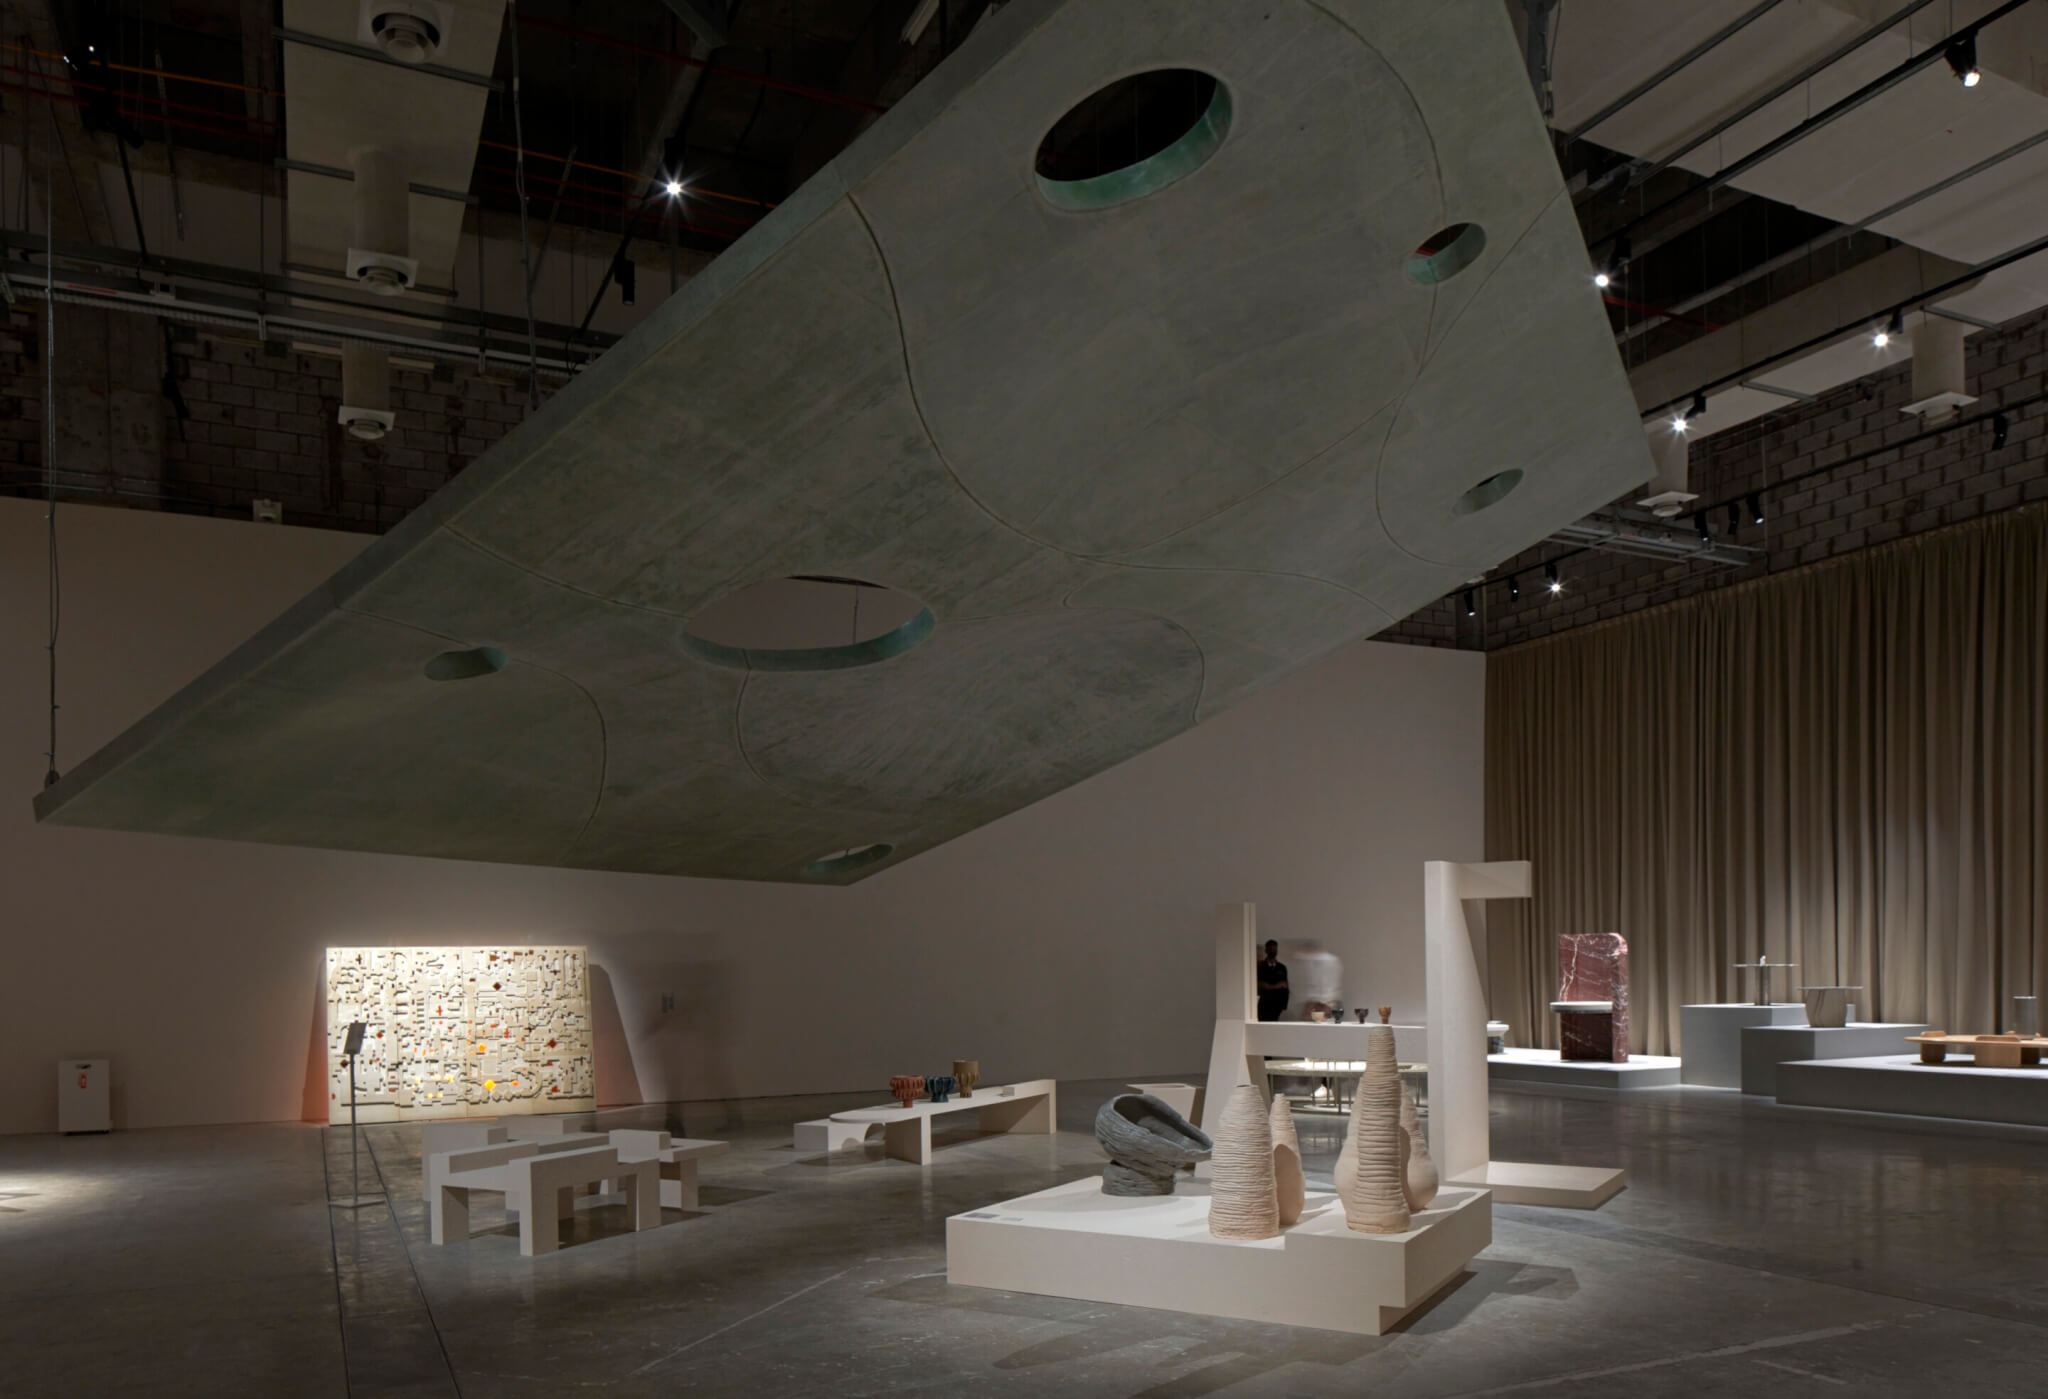 installation view of Arab design now at Design Doha